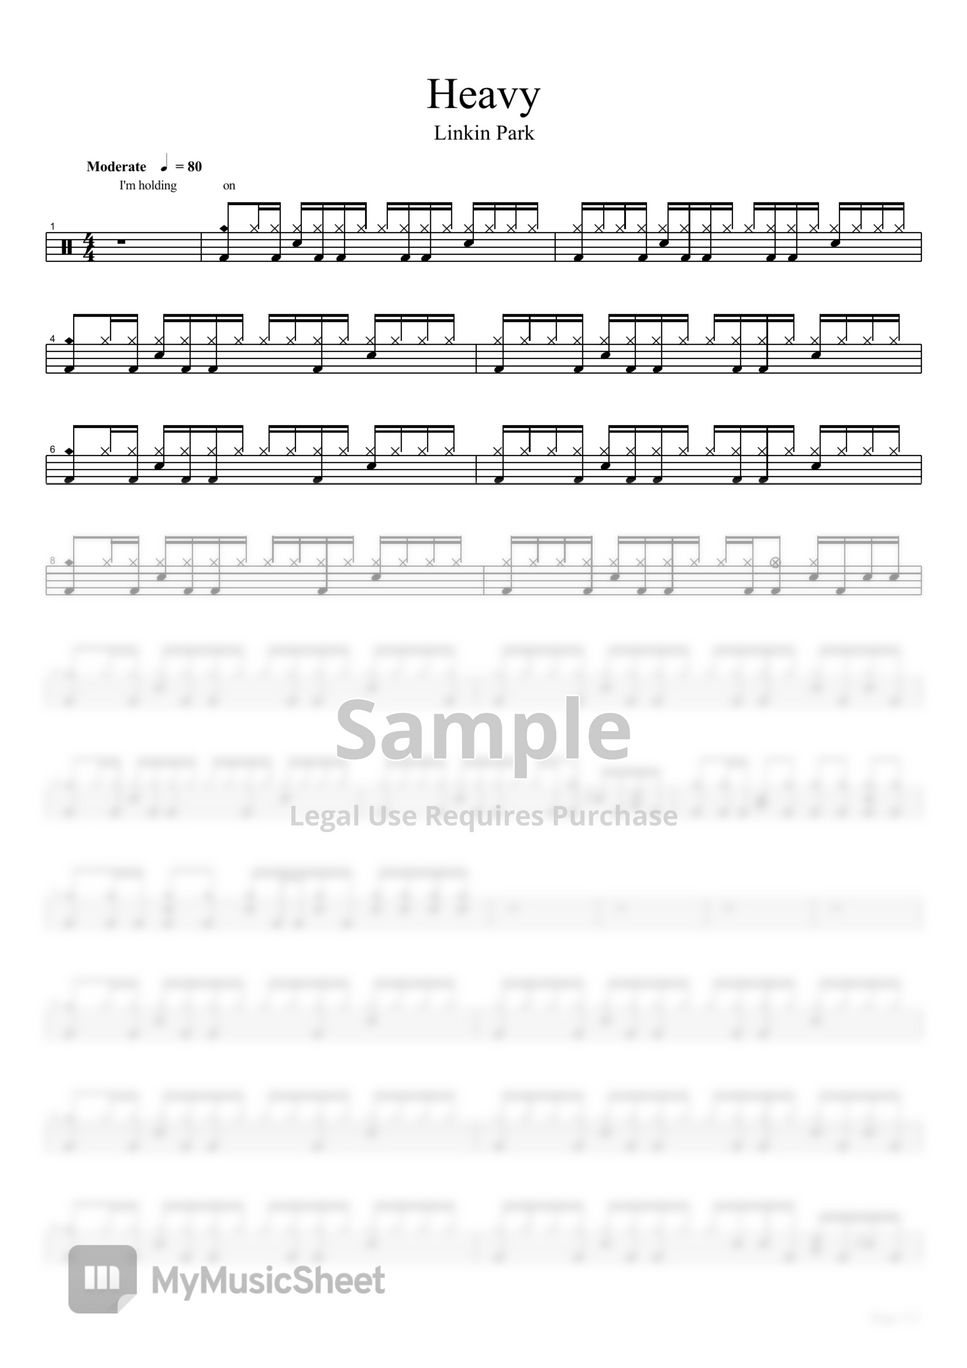 Linkin Park  - heavy - heavy(Drum Sheet ) by Kyle Yeung